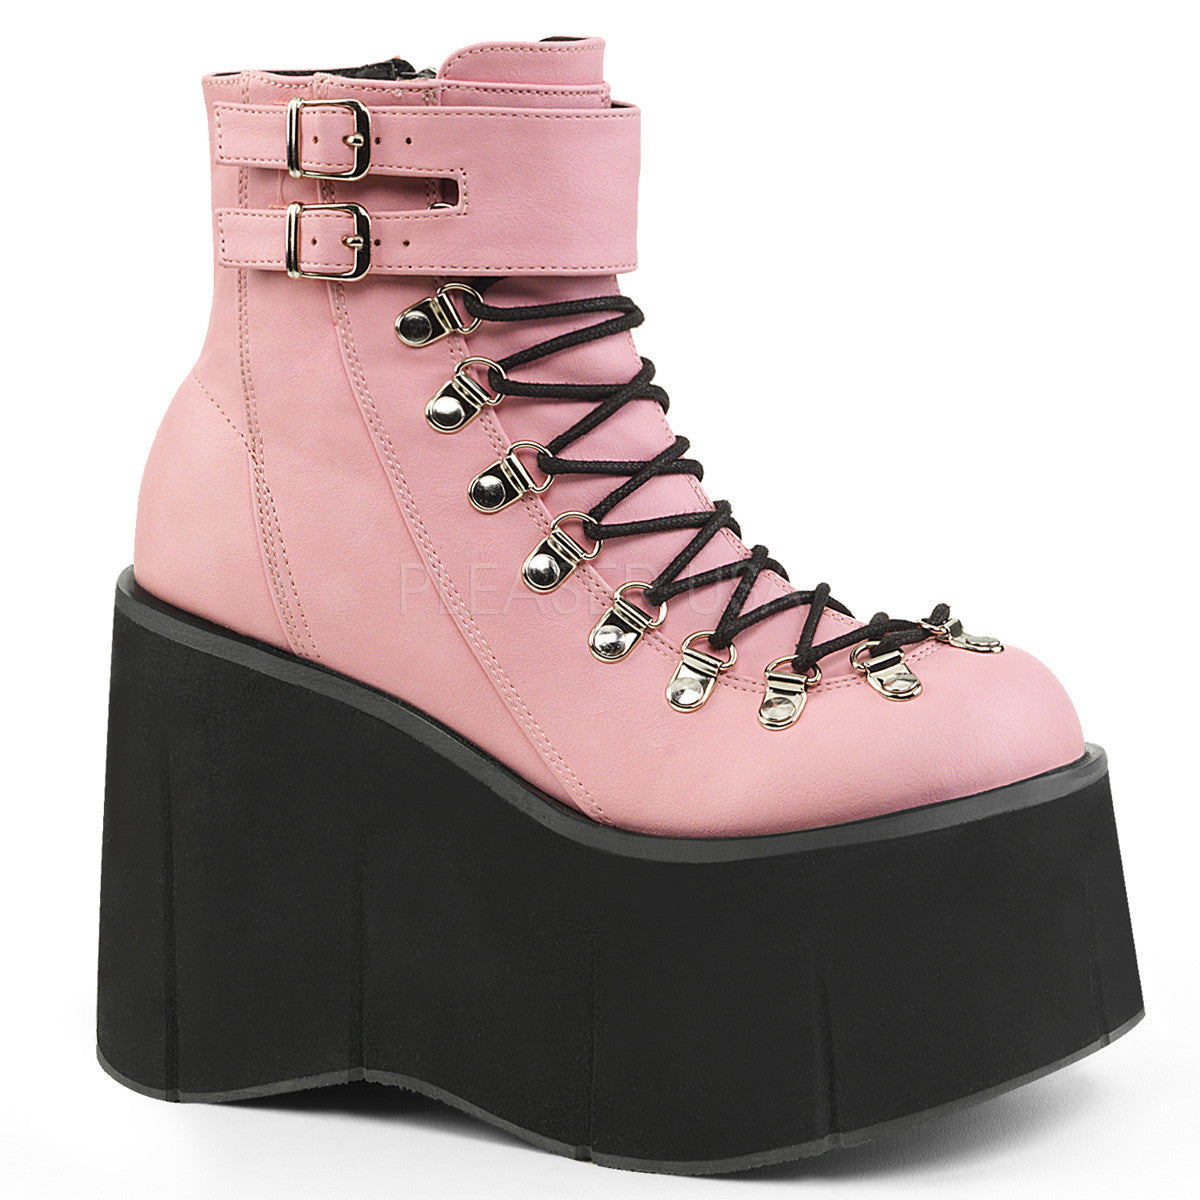 Demonia KERA-21 Baby Pink Ankle Boots - Shoecup.com - 1